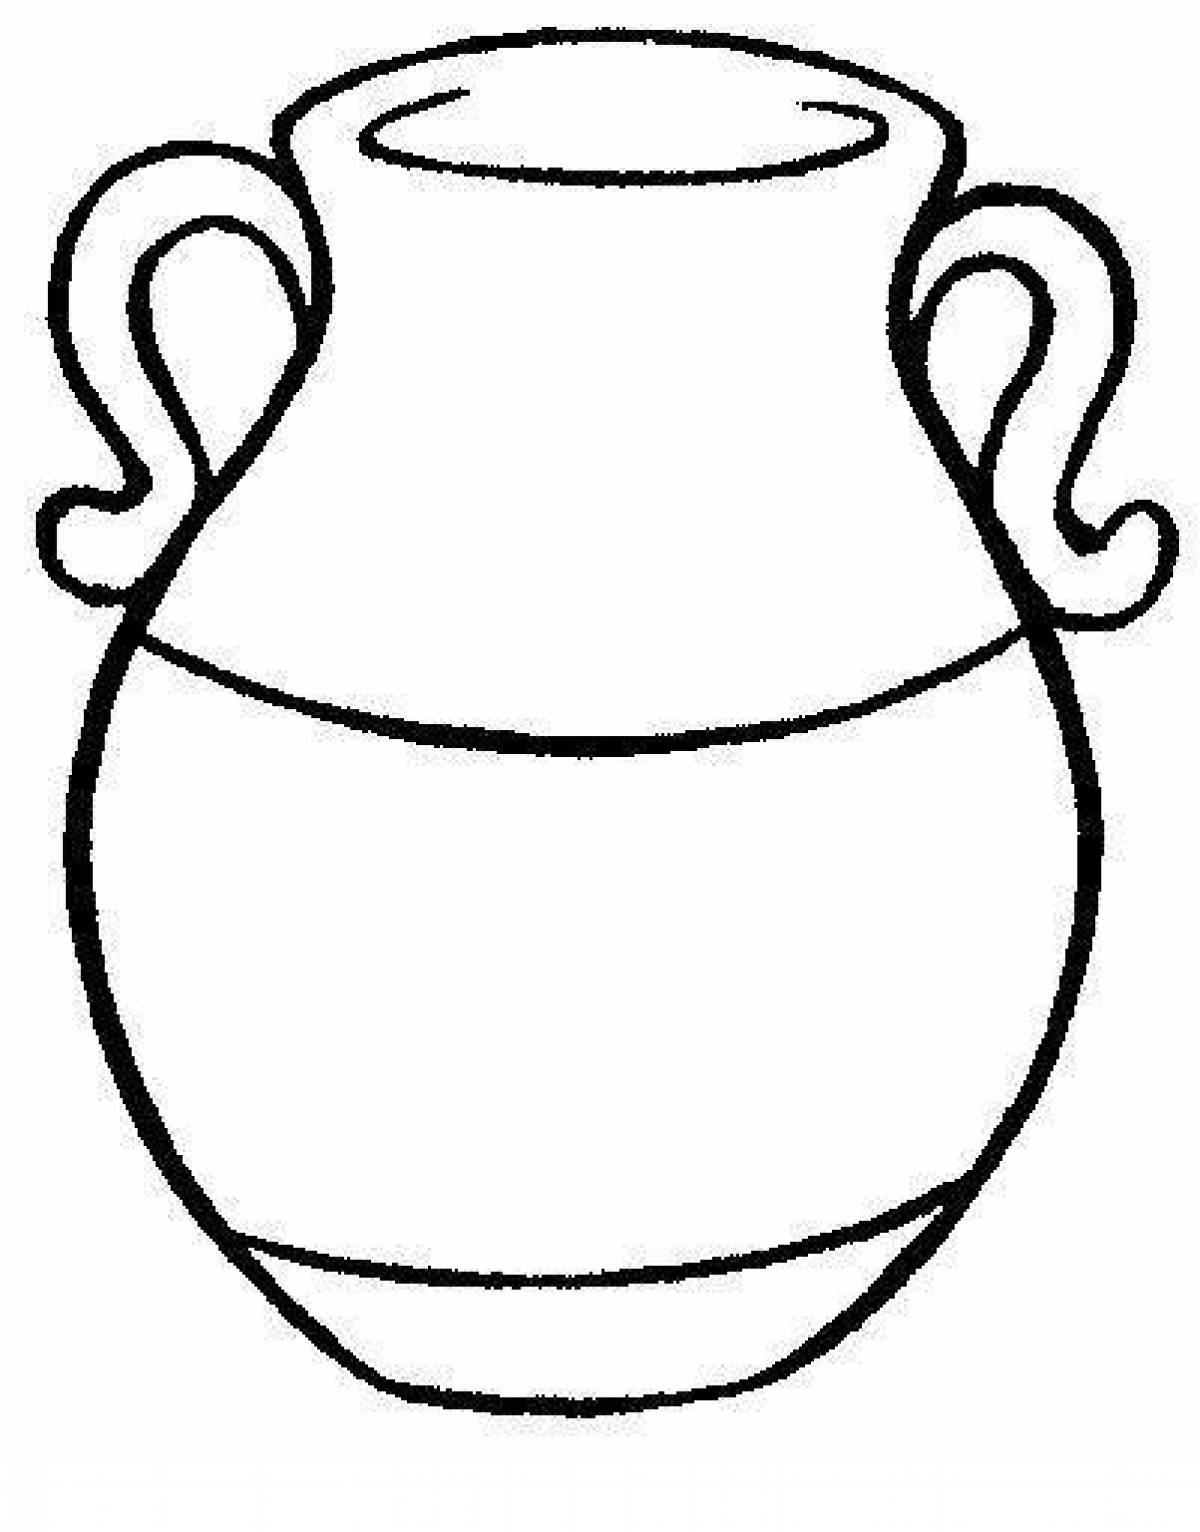 Shining Jug Coloring Page for Toddlers